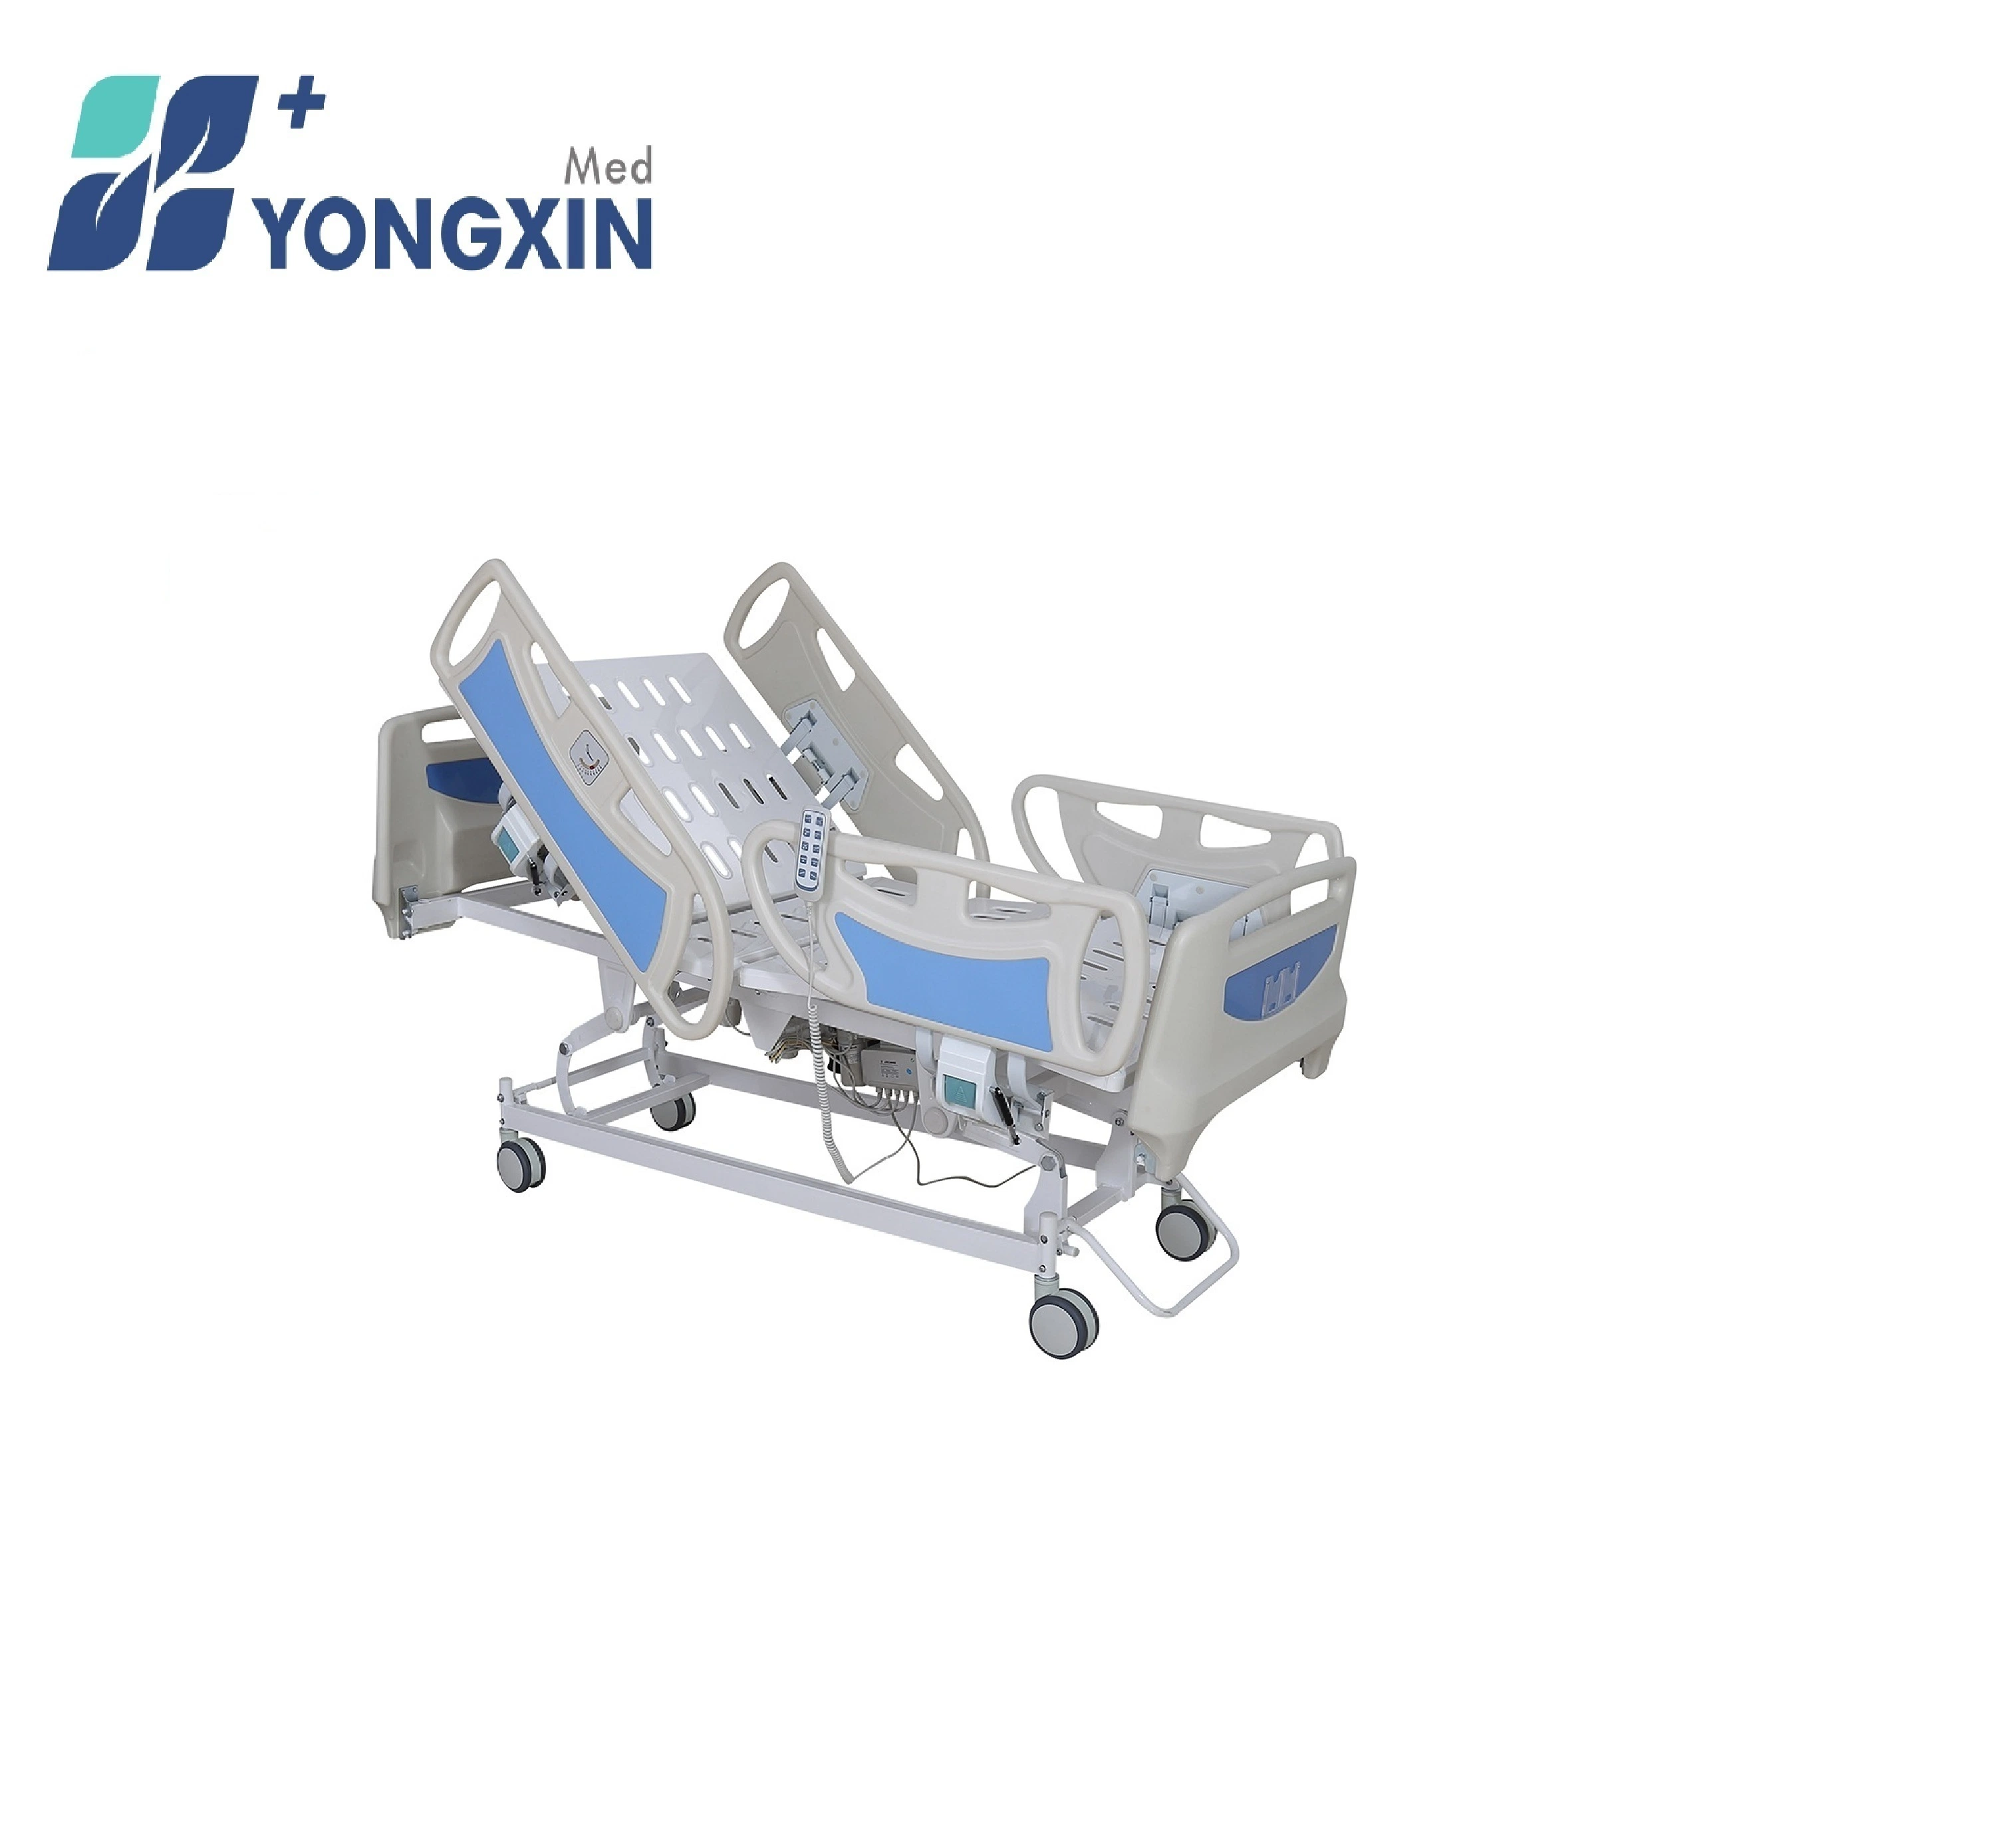 Yxz-C3 (A3) Medical Equipment Three Function Electric Hospital Bed